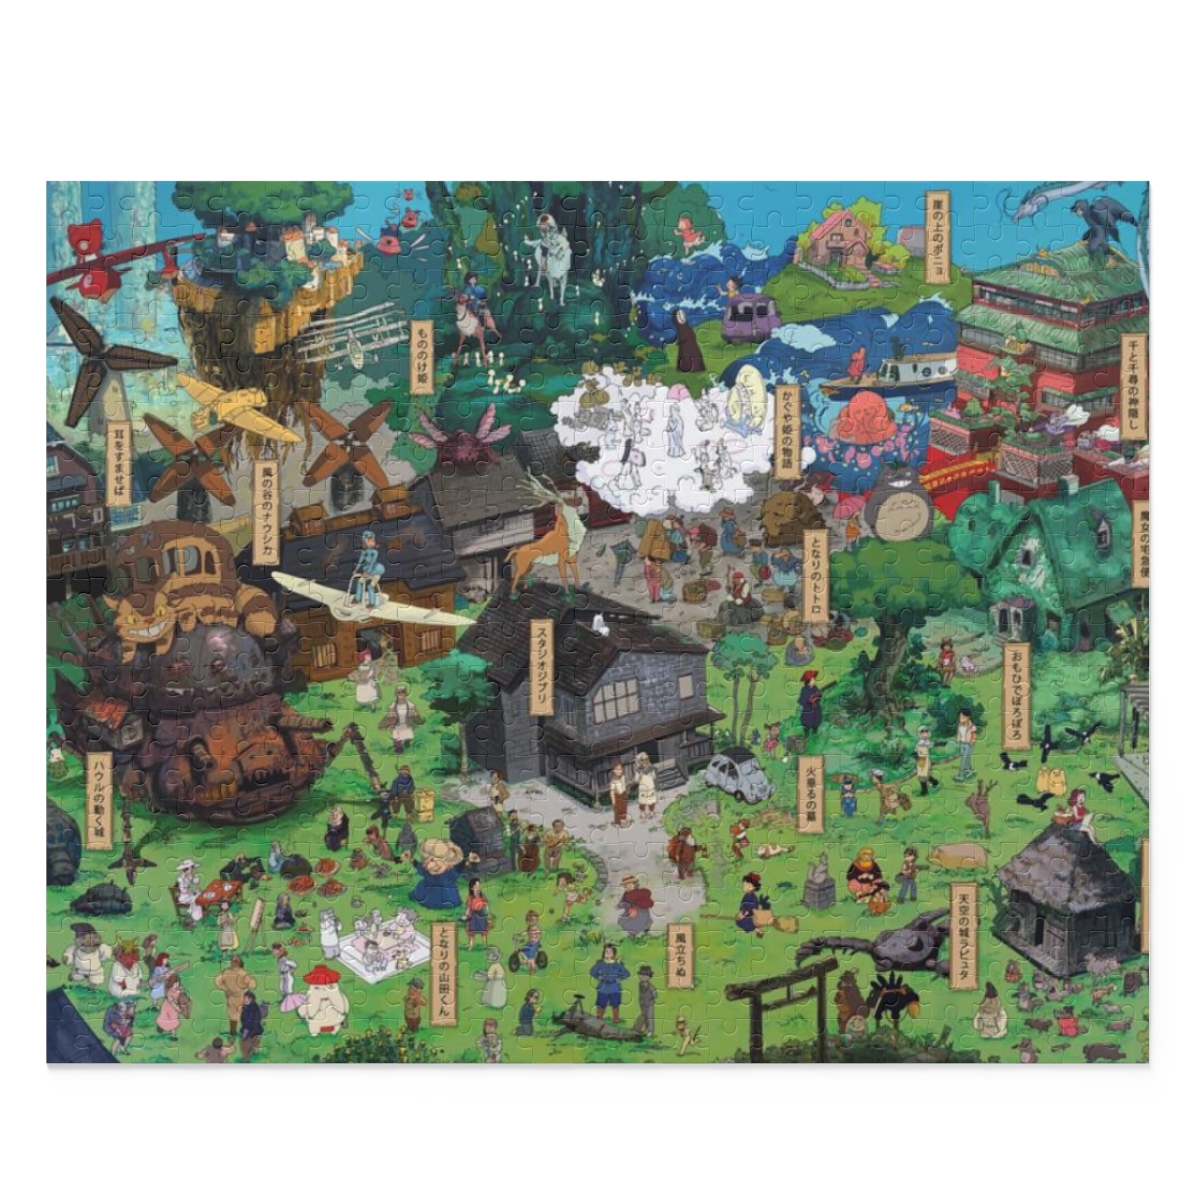 3-Pack 120 Piece Jigsaw Puzzles